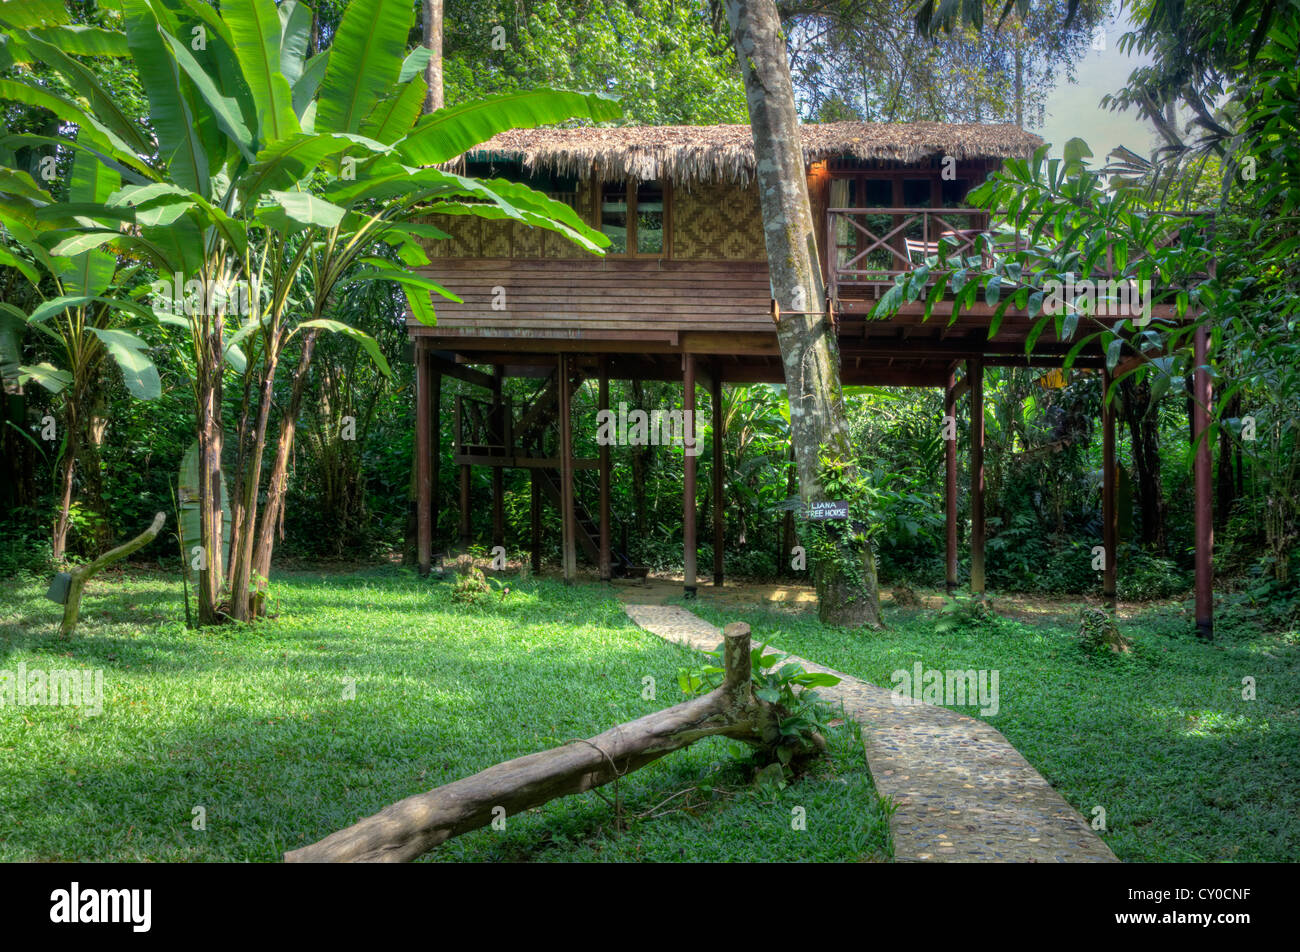 TREE HOUSES are the specialty of OUR JUNGLE HOUSE KHAO SOK NATIONAL PARK - SURATHANI PROVENCE, THAILAND Stock Photo